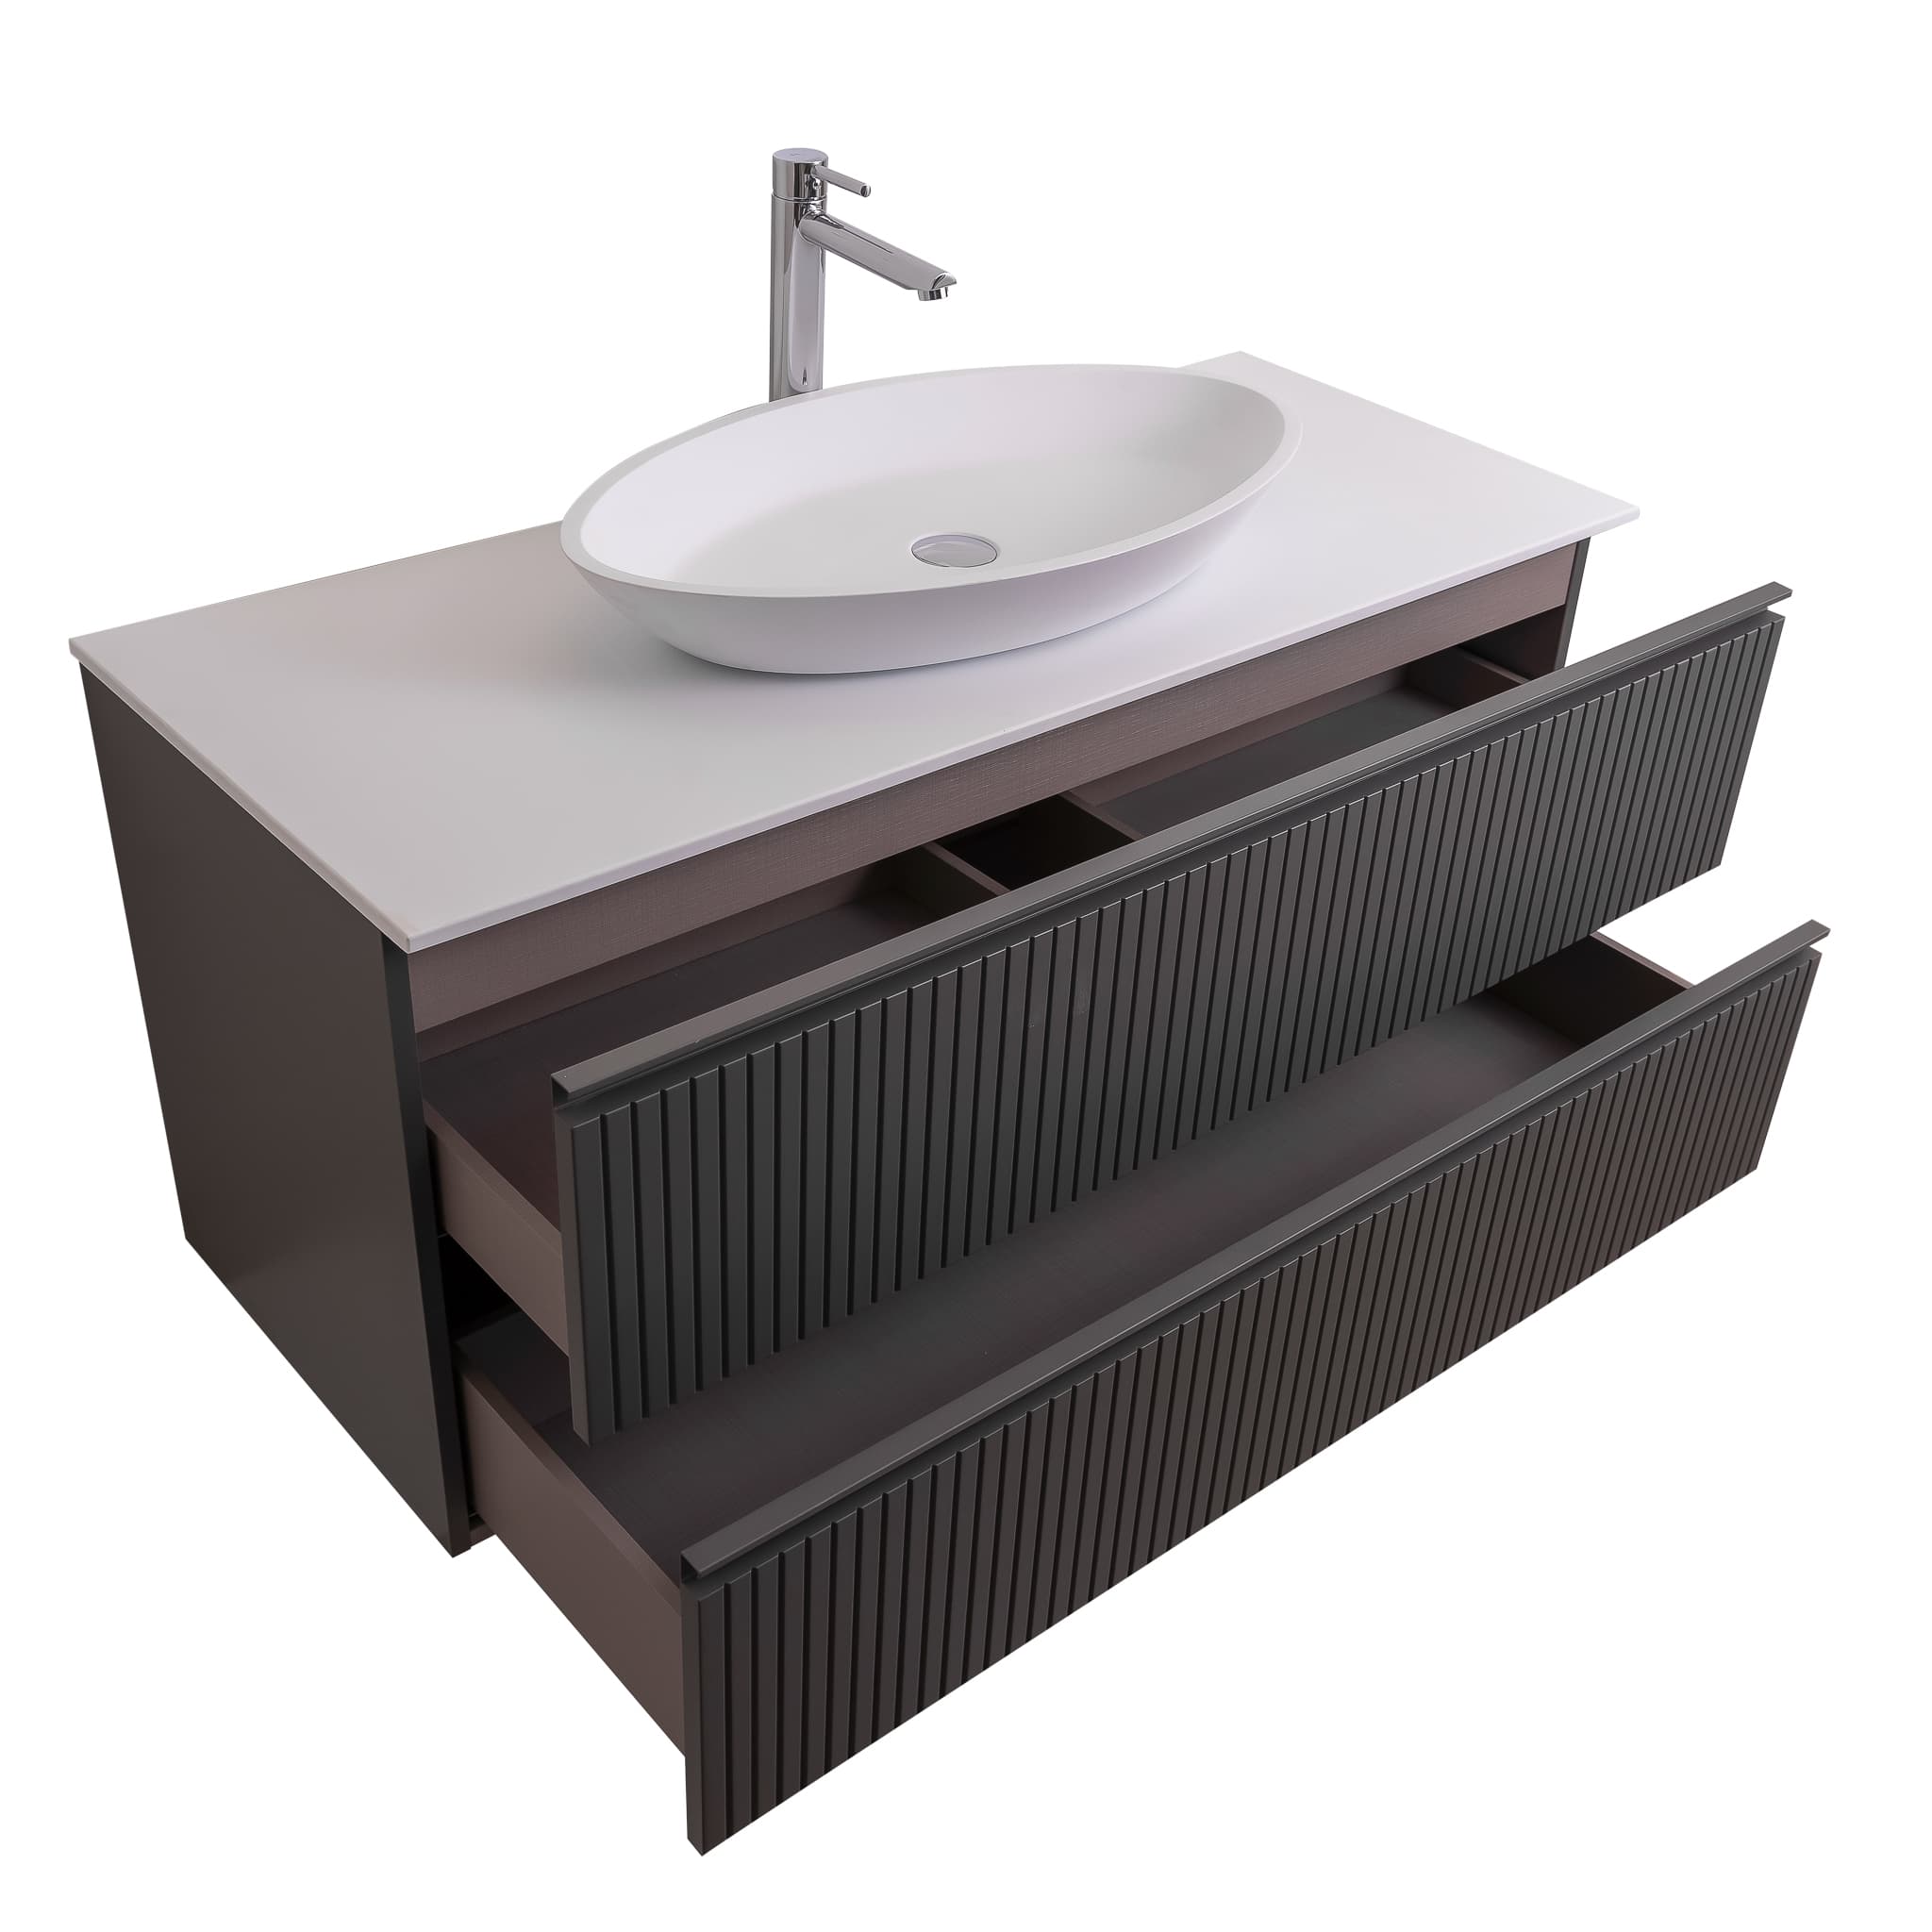 Ares 47.5 Matte Grey Cabinet, Solid Surface Flat White Counter And Oval Solid Surface White Basin 1305, Wall Mounted Modern Vanity Set